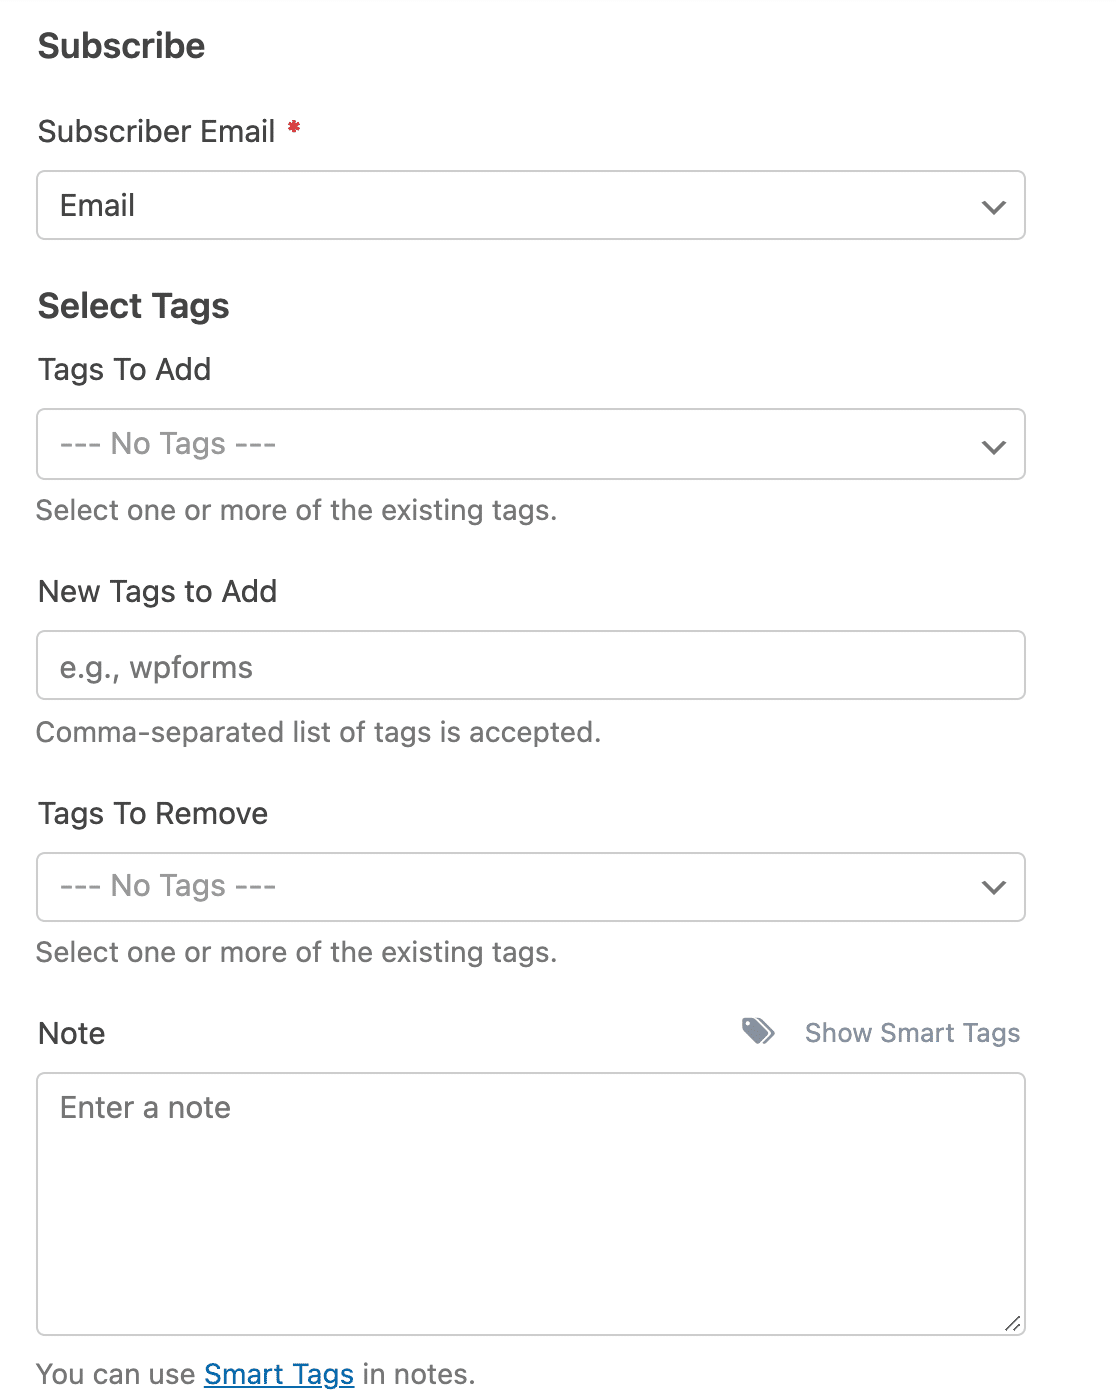 Settings for the Mailchimp Subscribe action